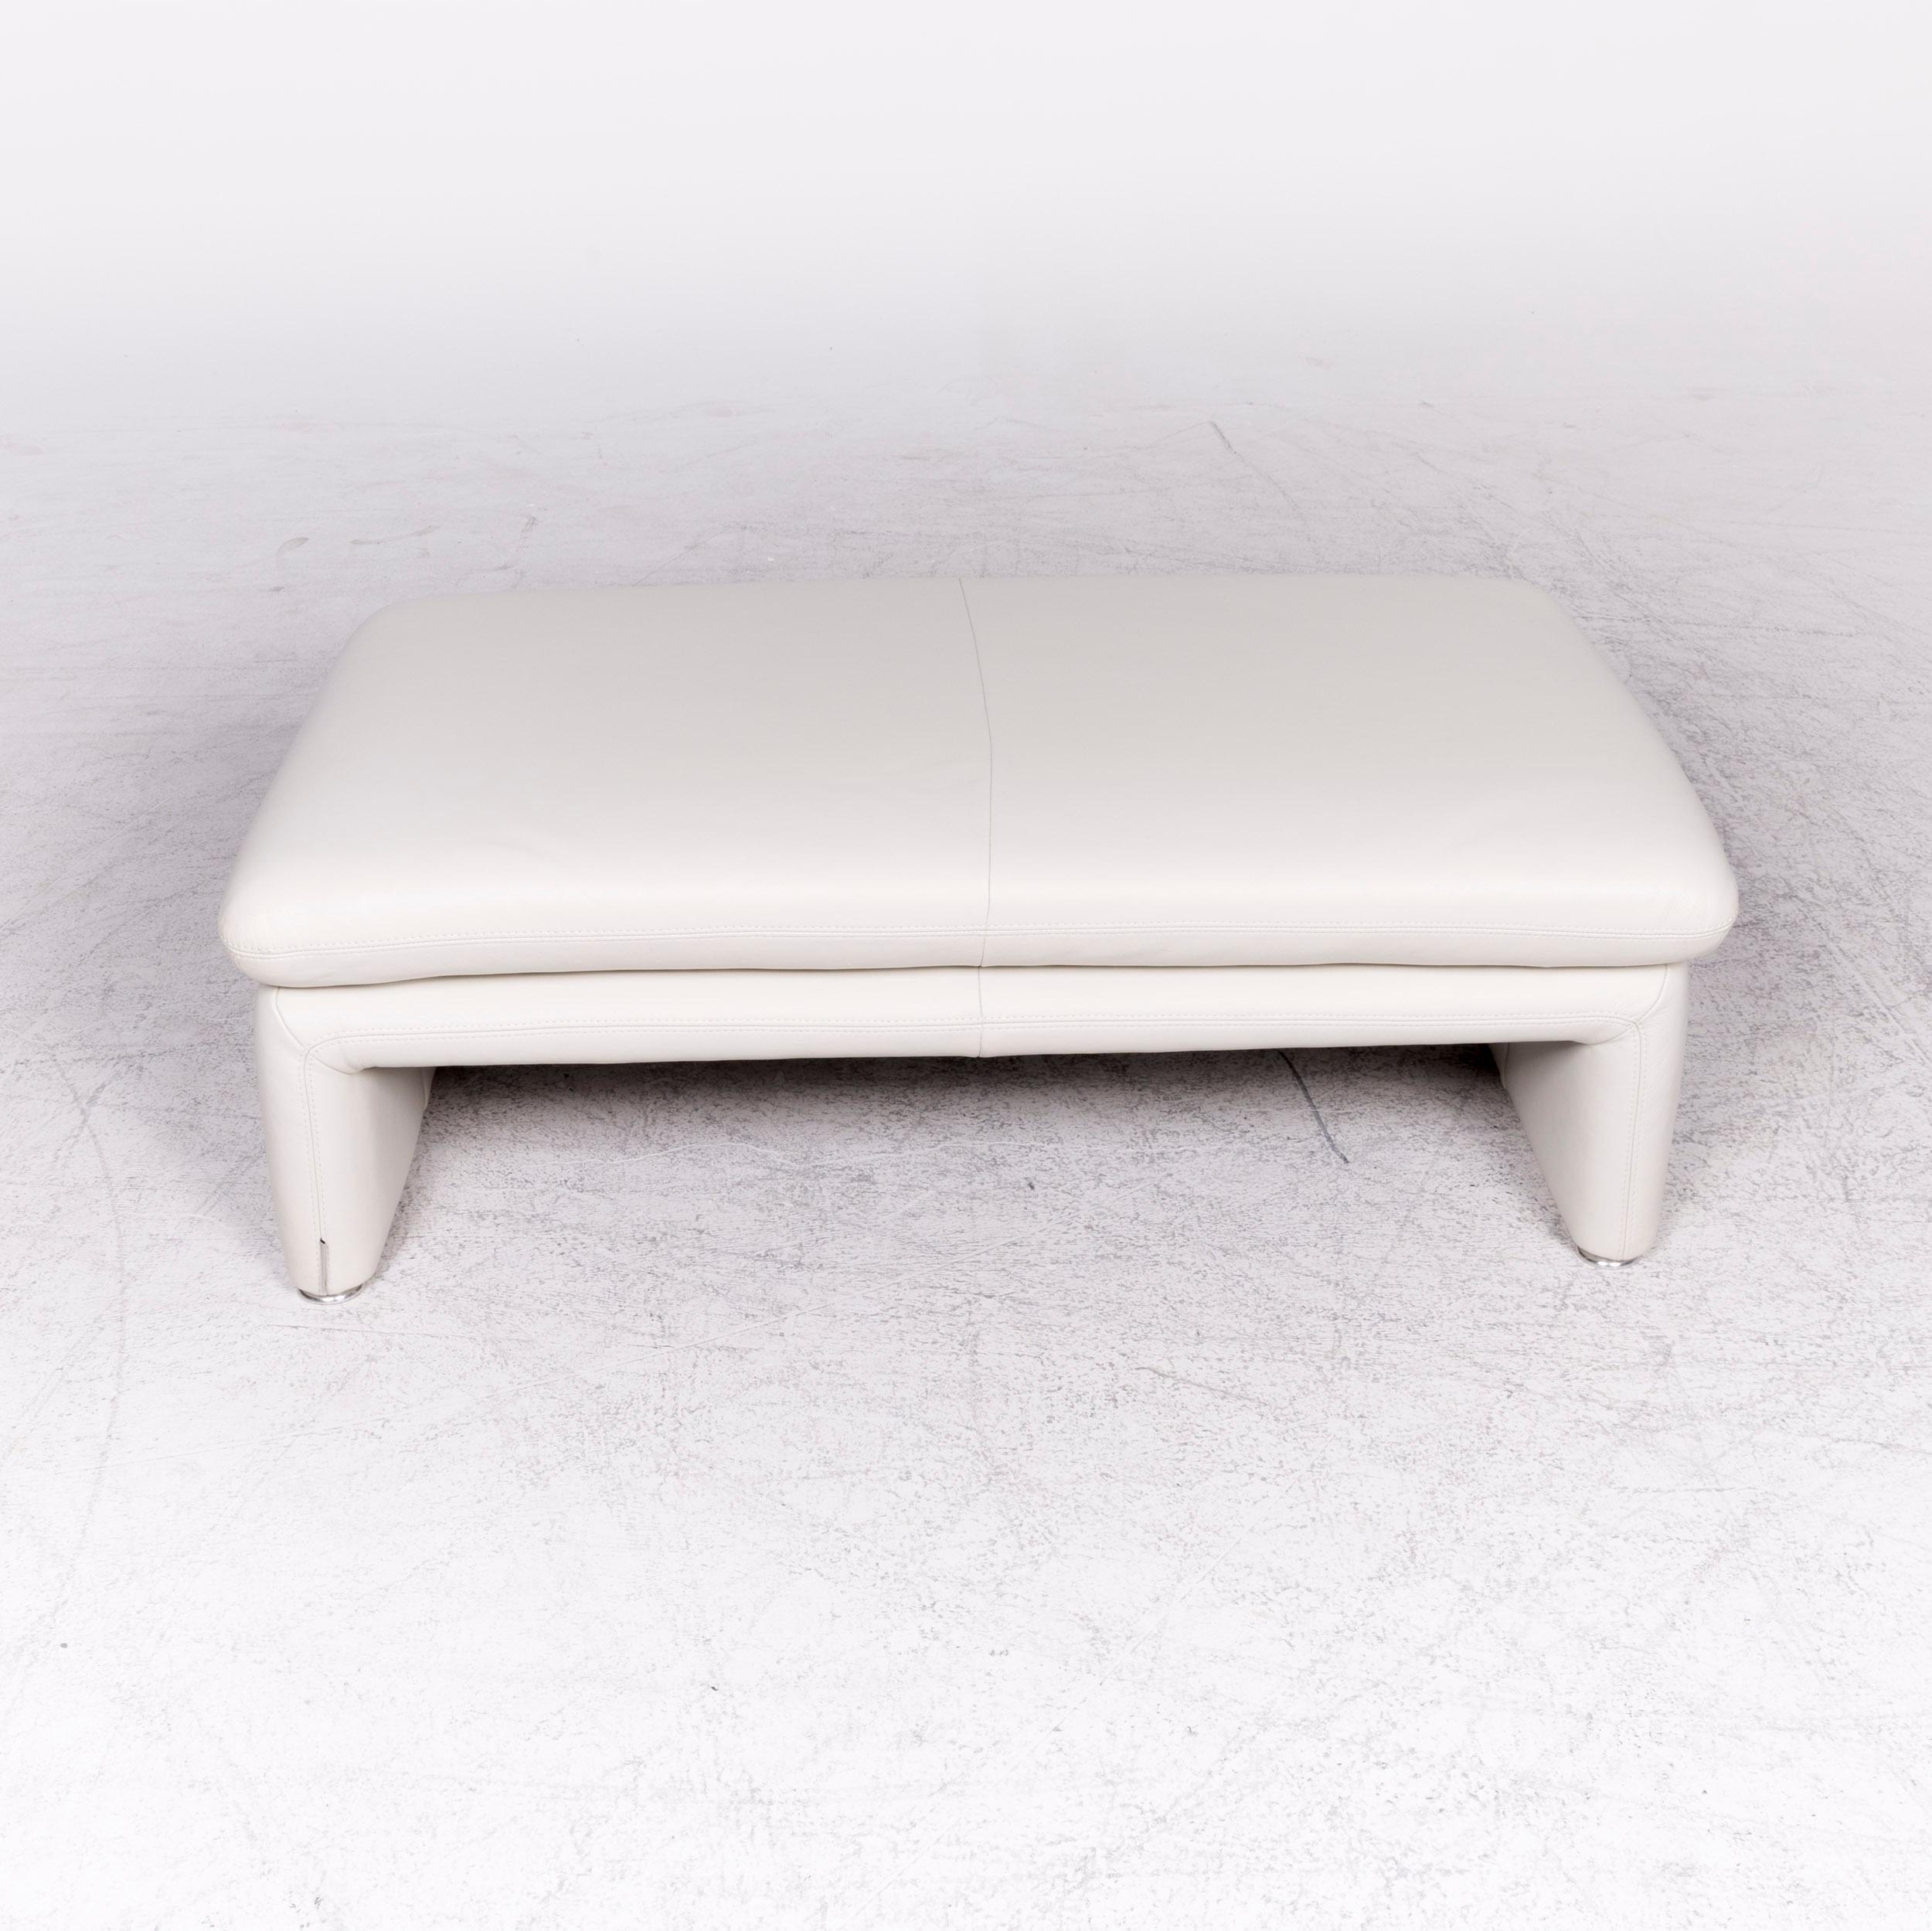 Contemporary Willi Schillig Brooklyn Designer Leather Stool White Genuine Leather Stool For Sale